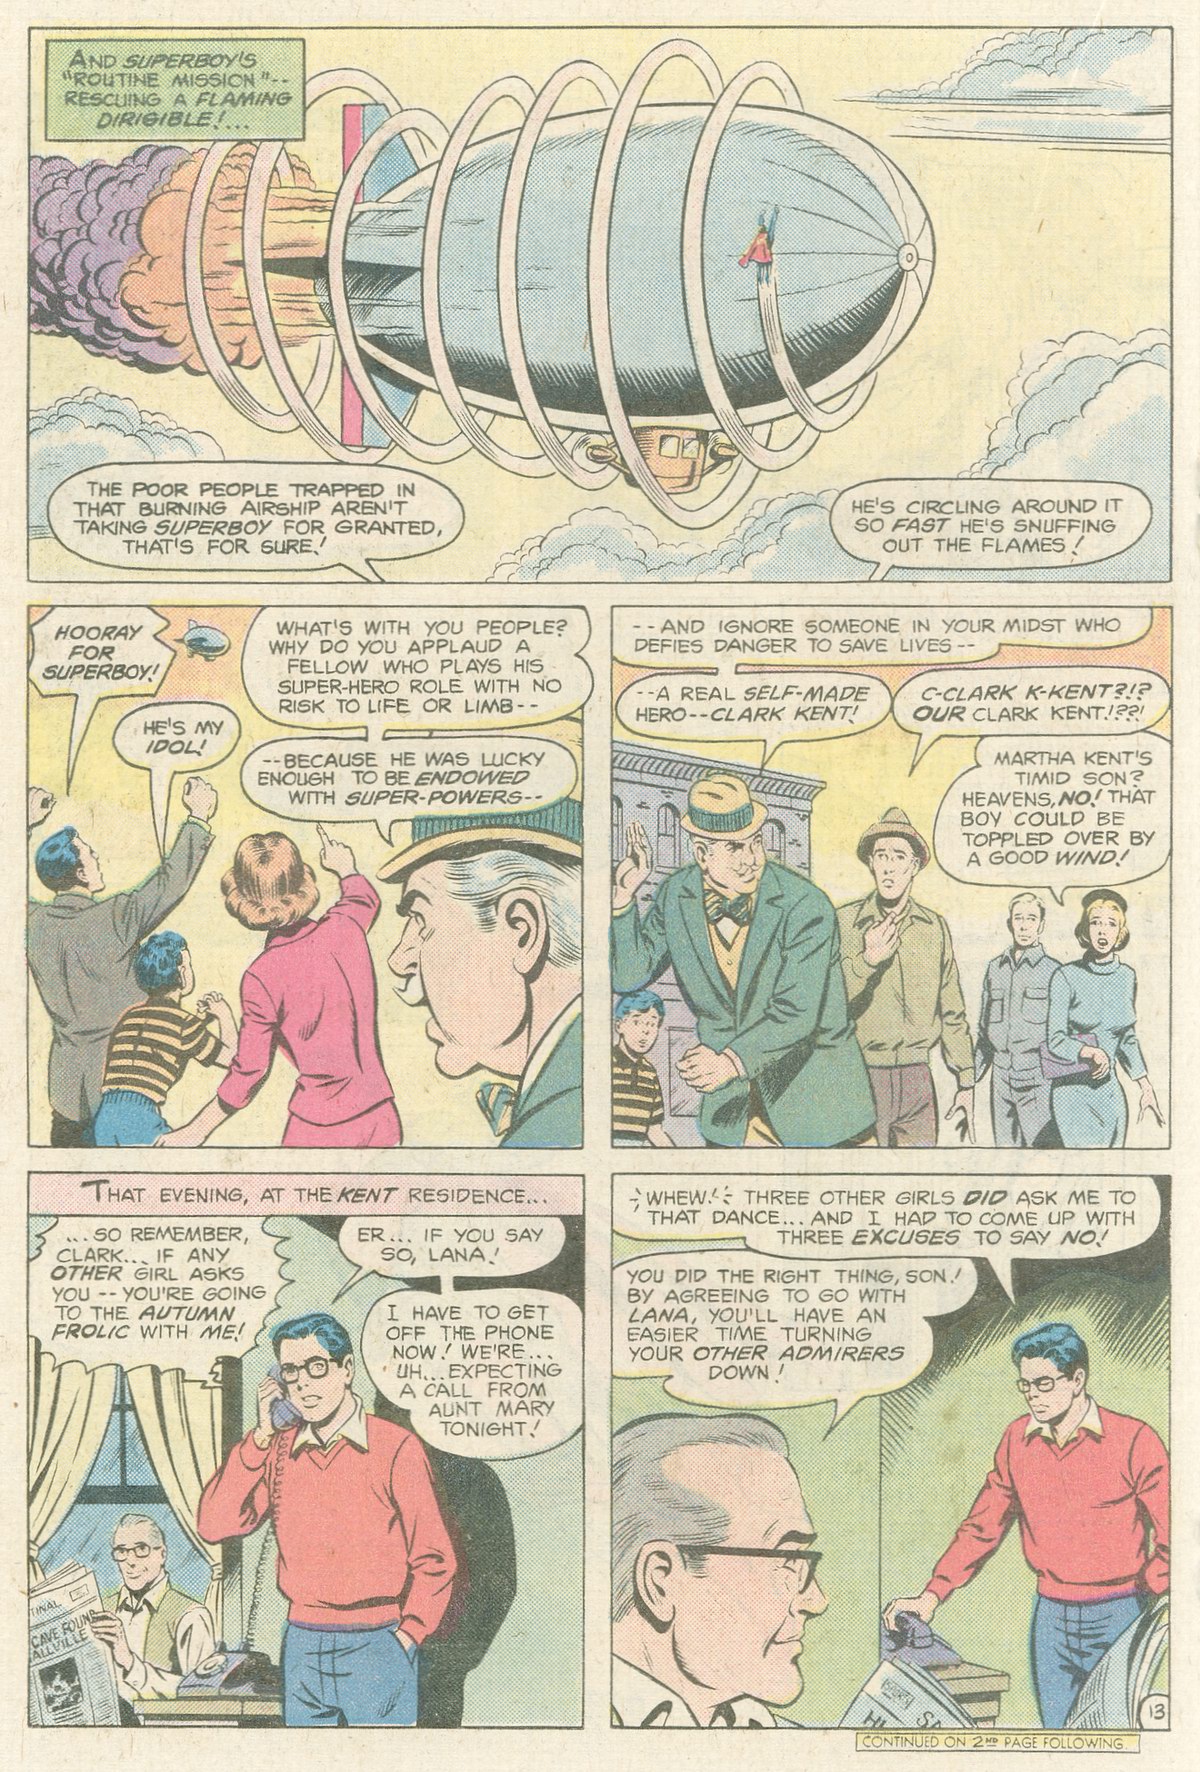 The New Adventures of Superboy 12 Page 13